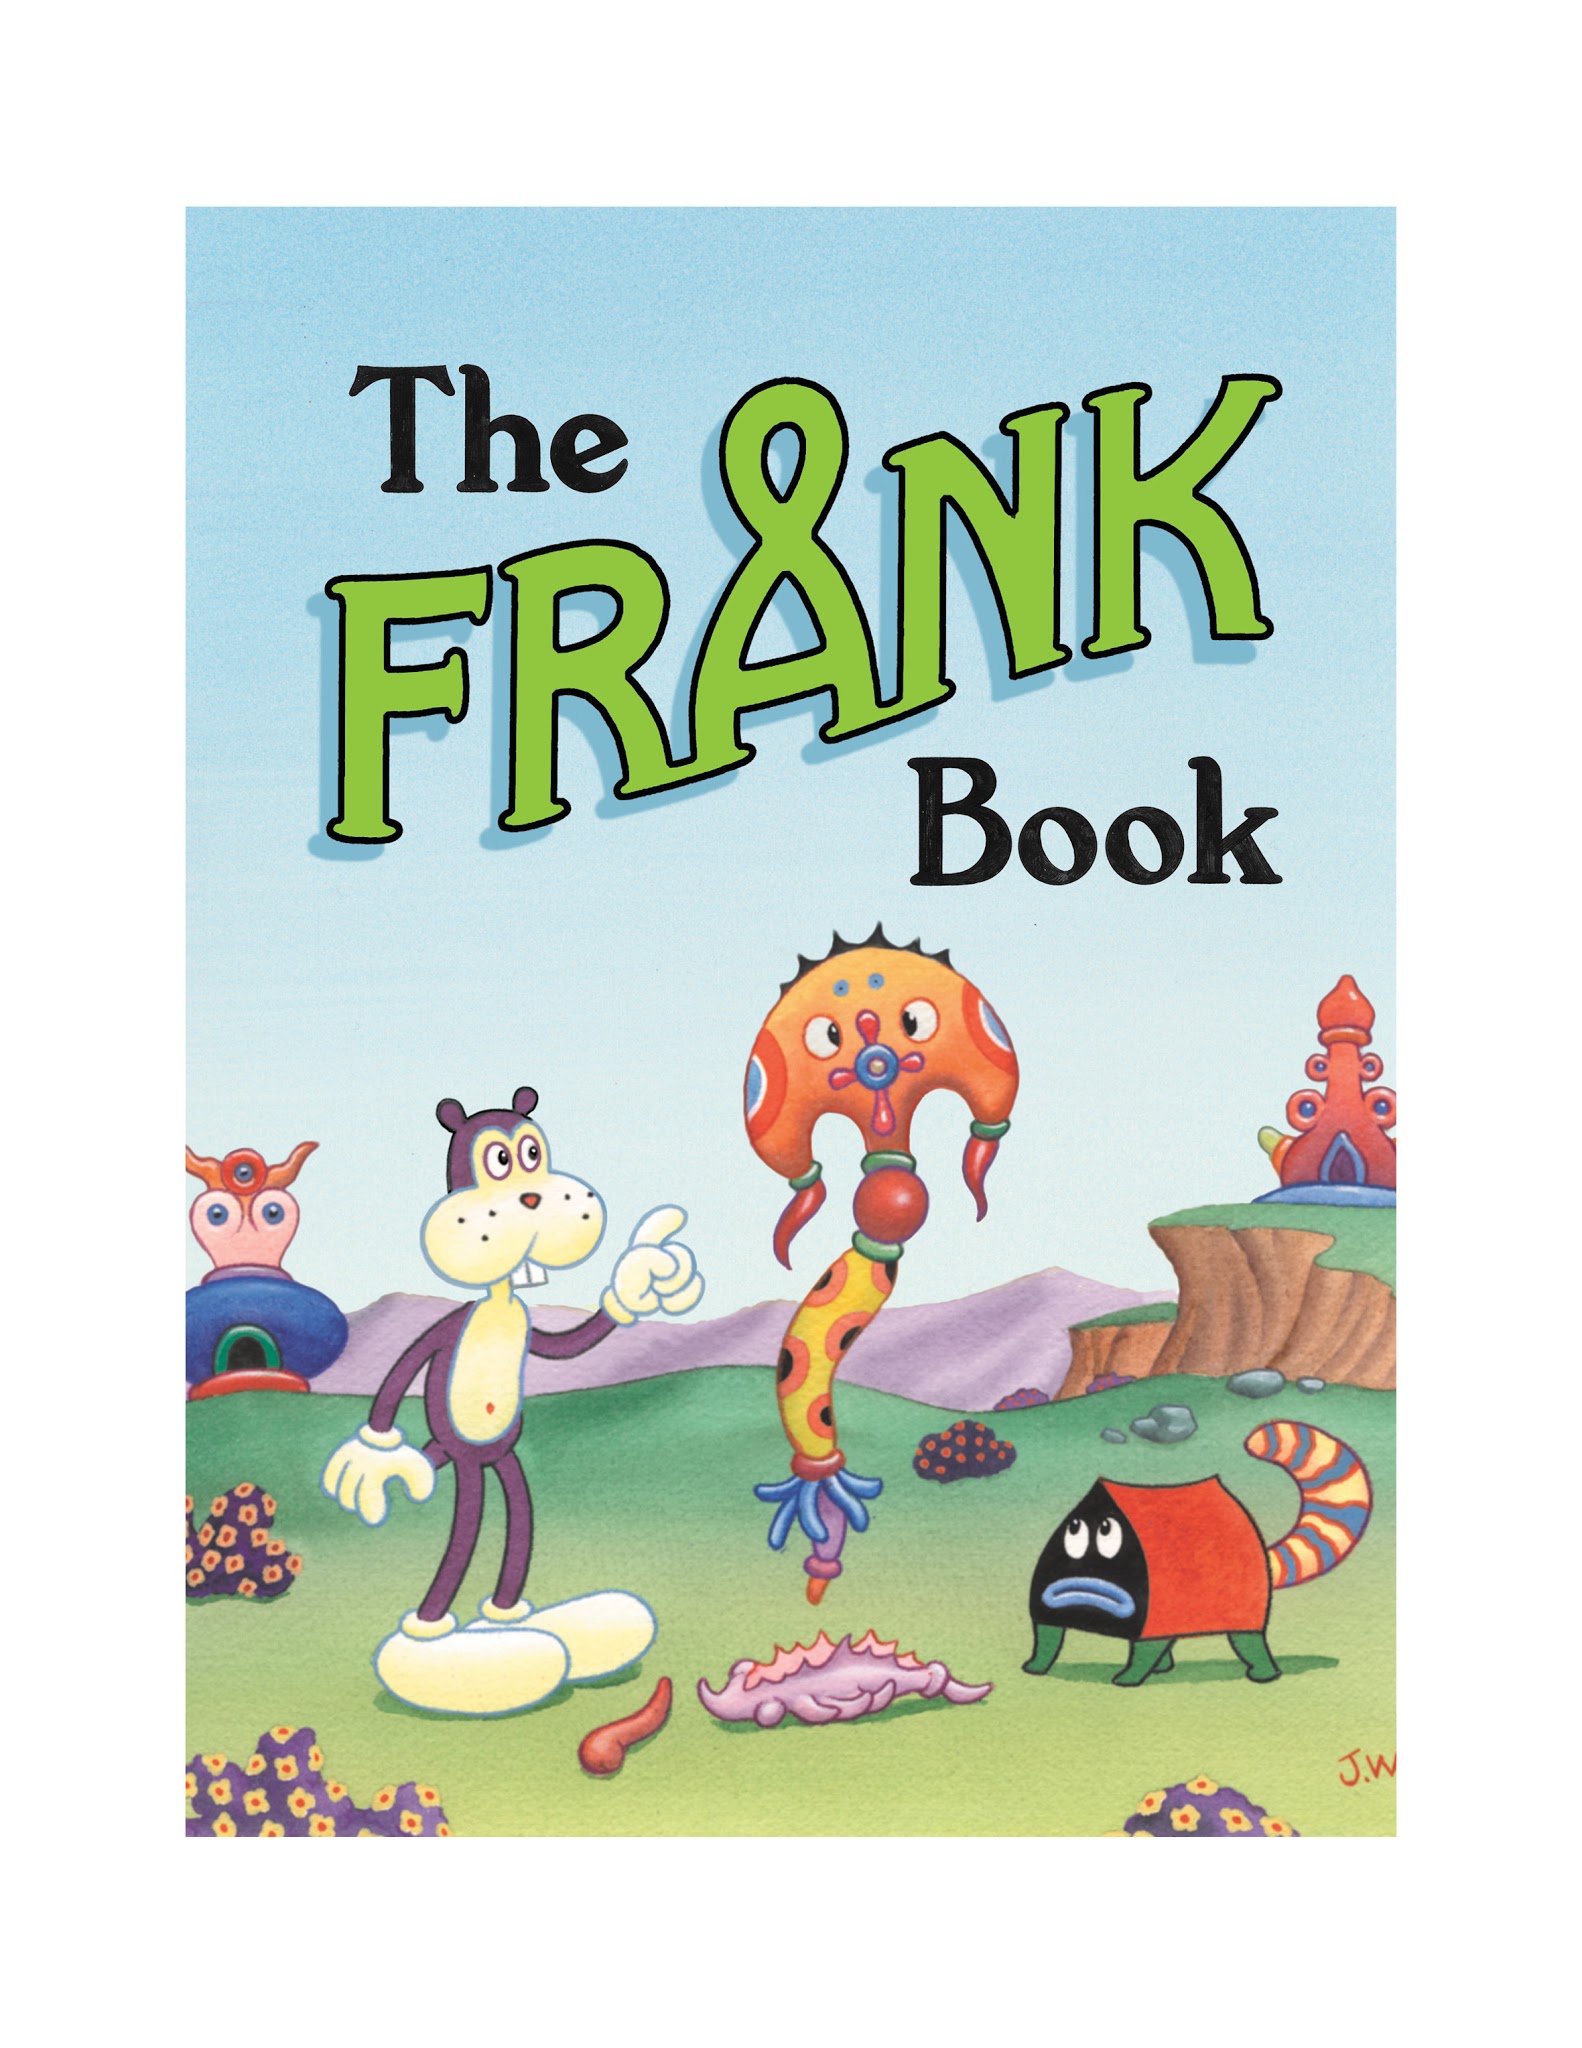 Read online The Frank Book comic -  Issue # TPB - 9